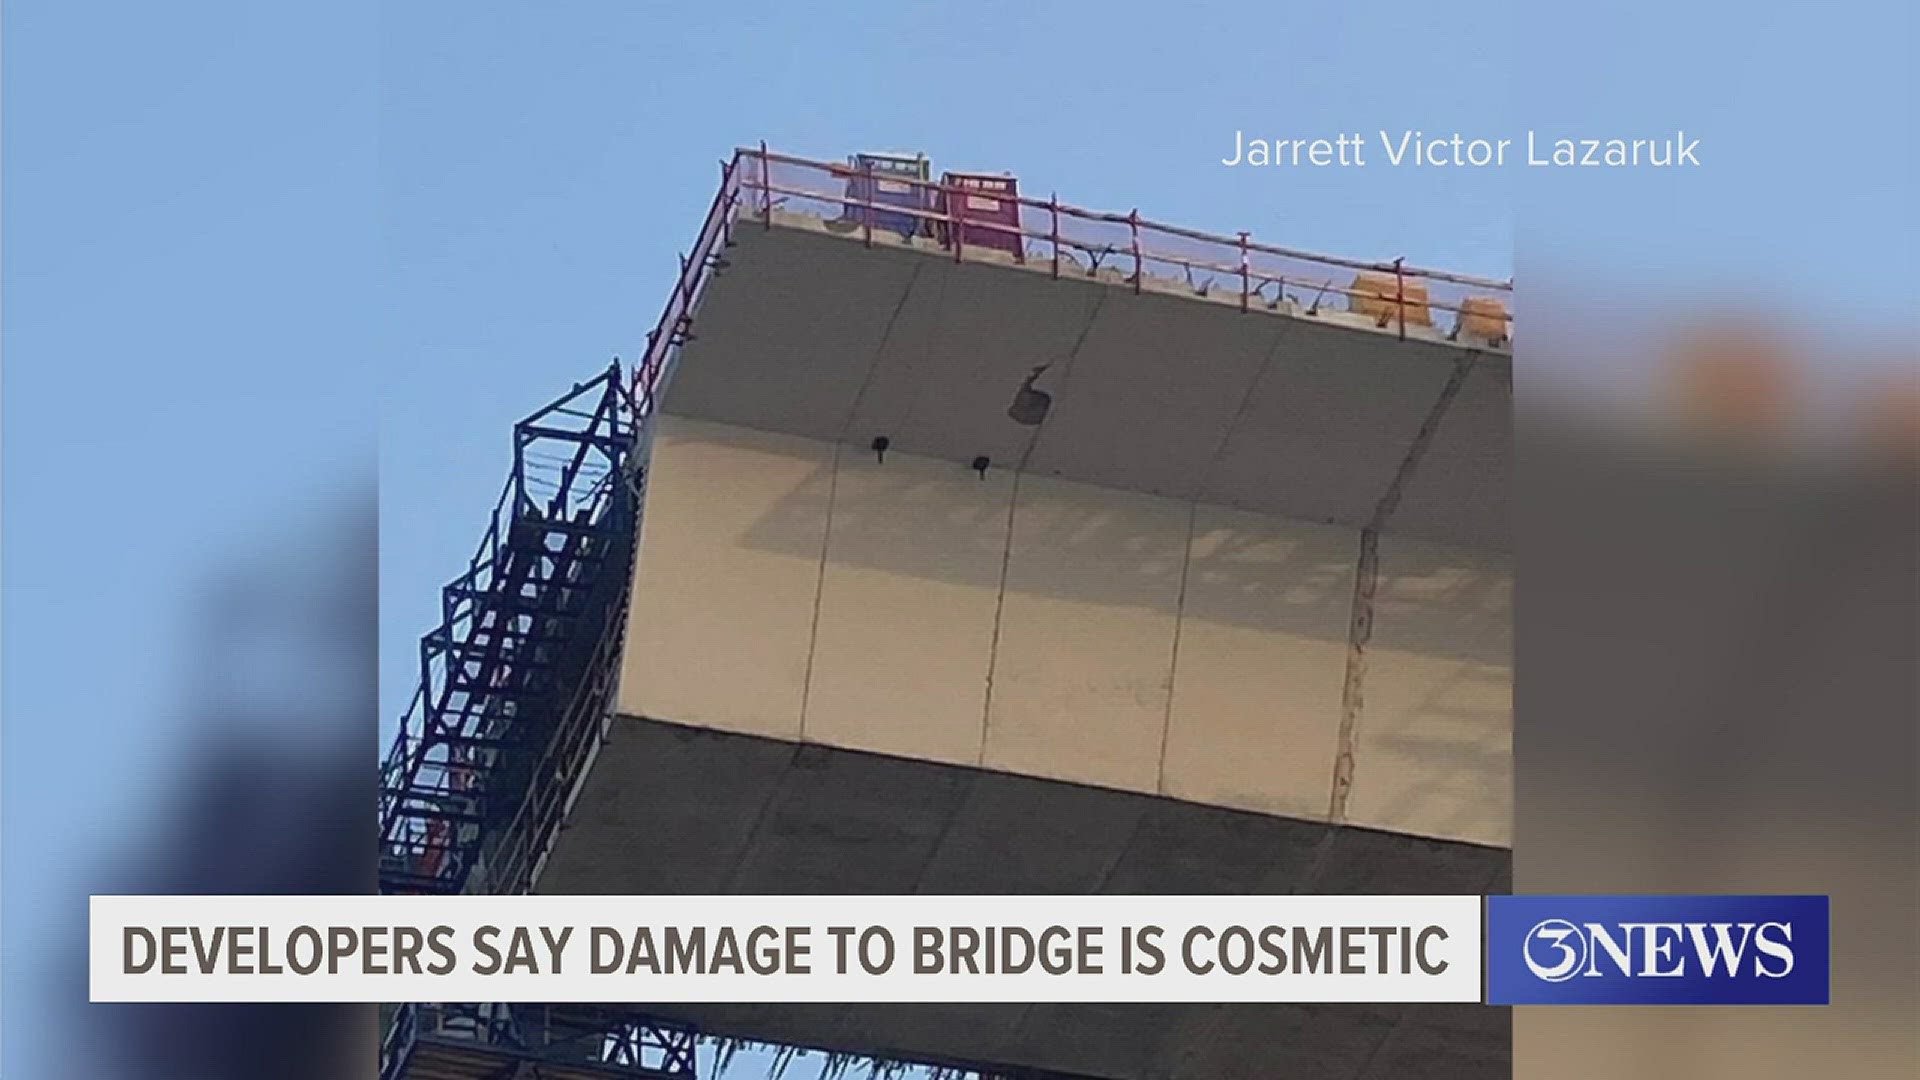 Flatiron Dragados Spokesperson Lynn Allison said this type of incident does not compromise the structural integrity of the concrete segment.